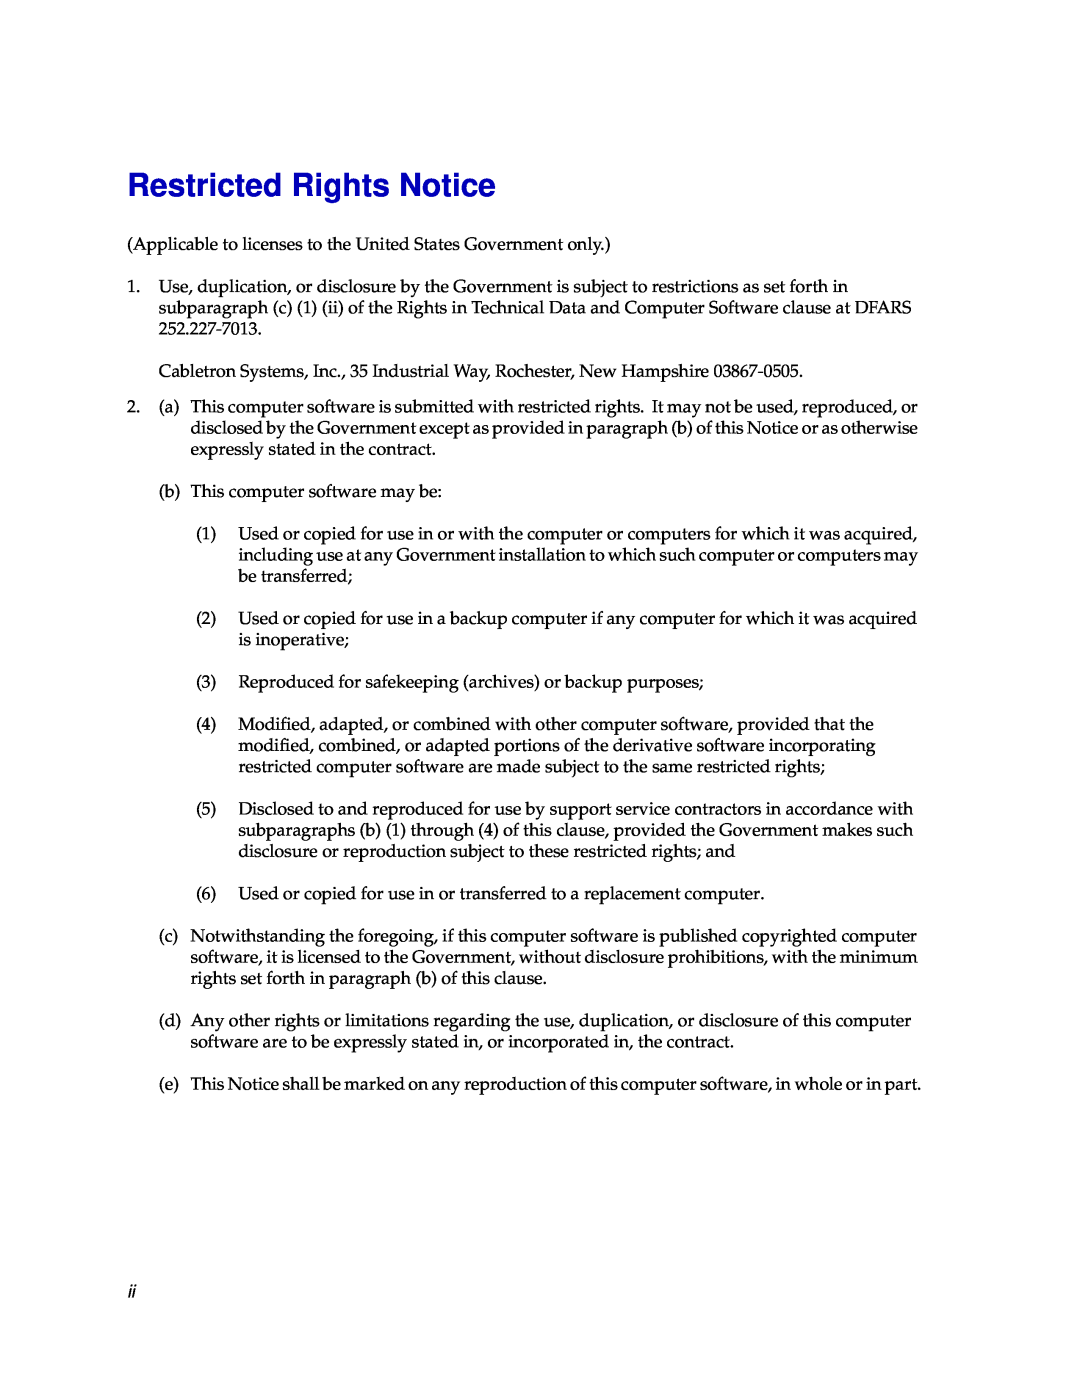 Cabletron Systems EMM-E6 manual Restricted Rights Notice 